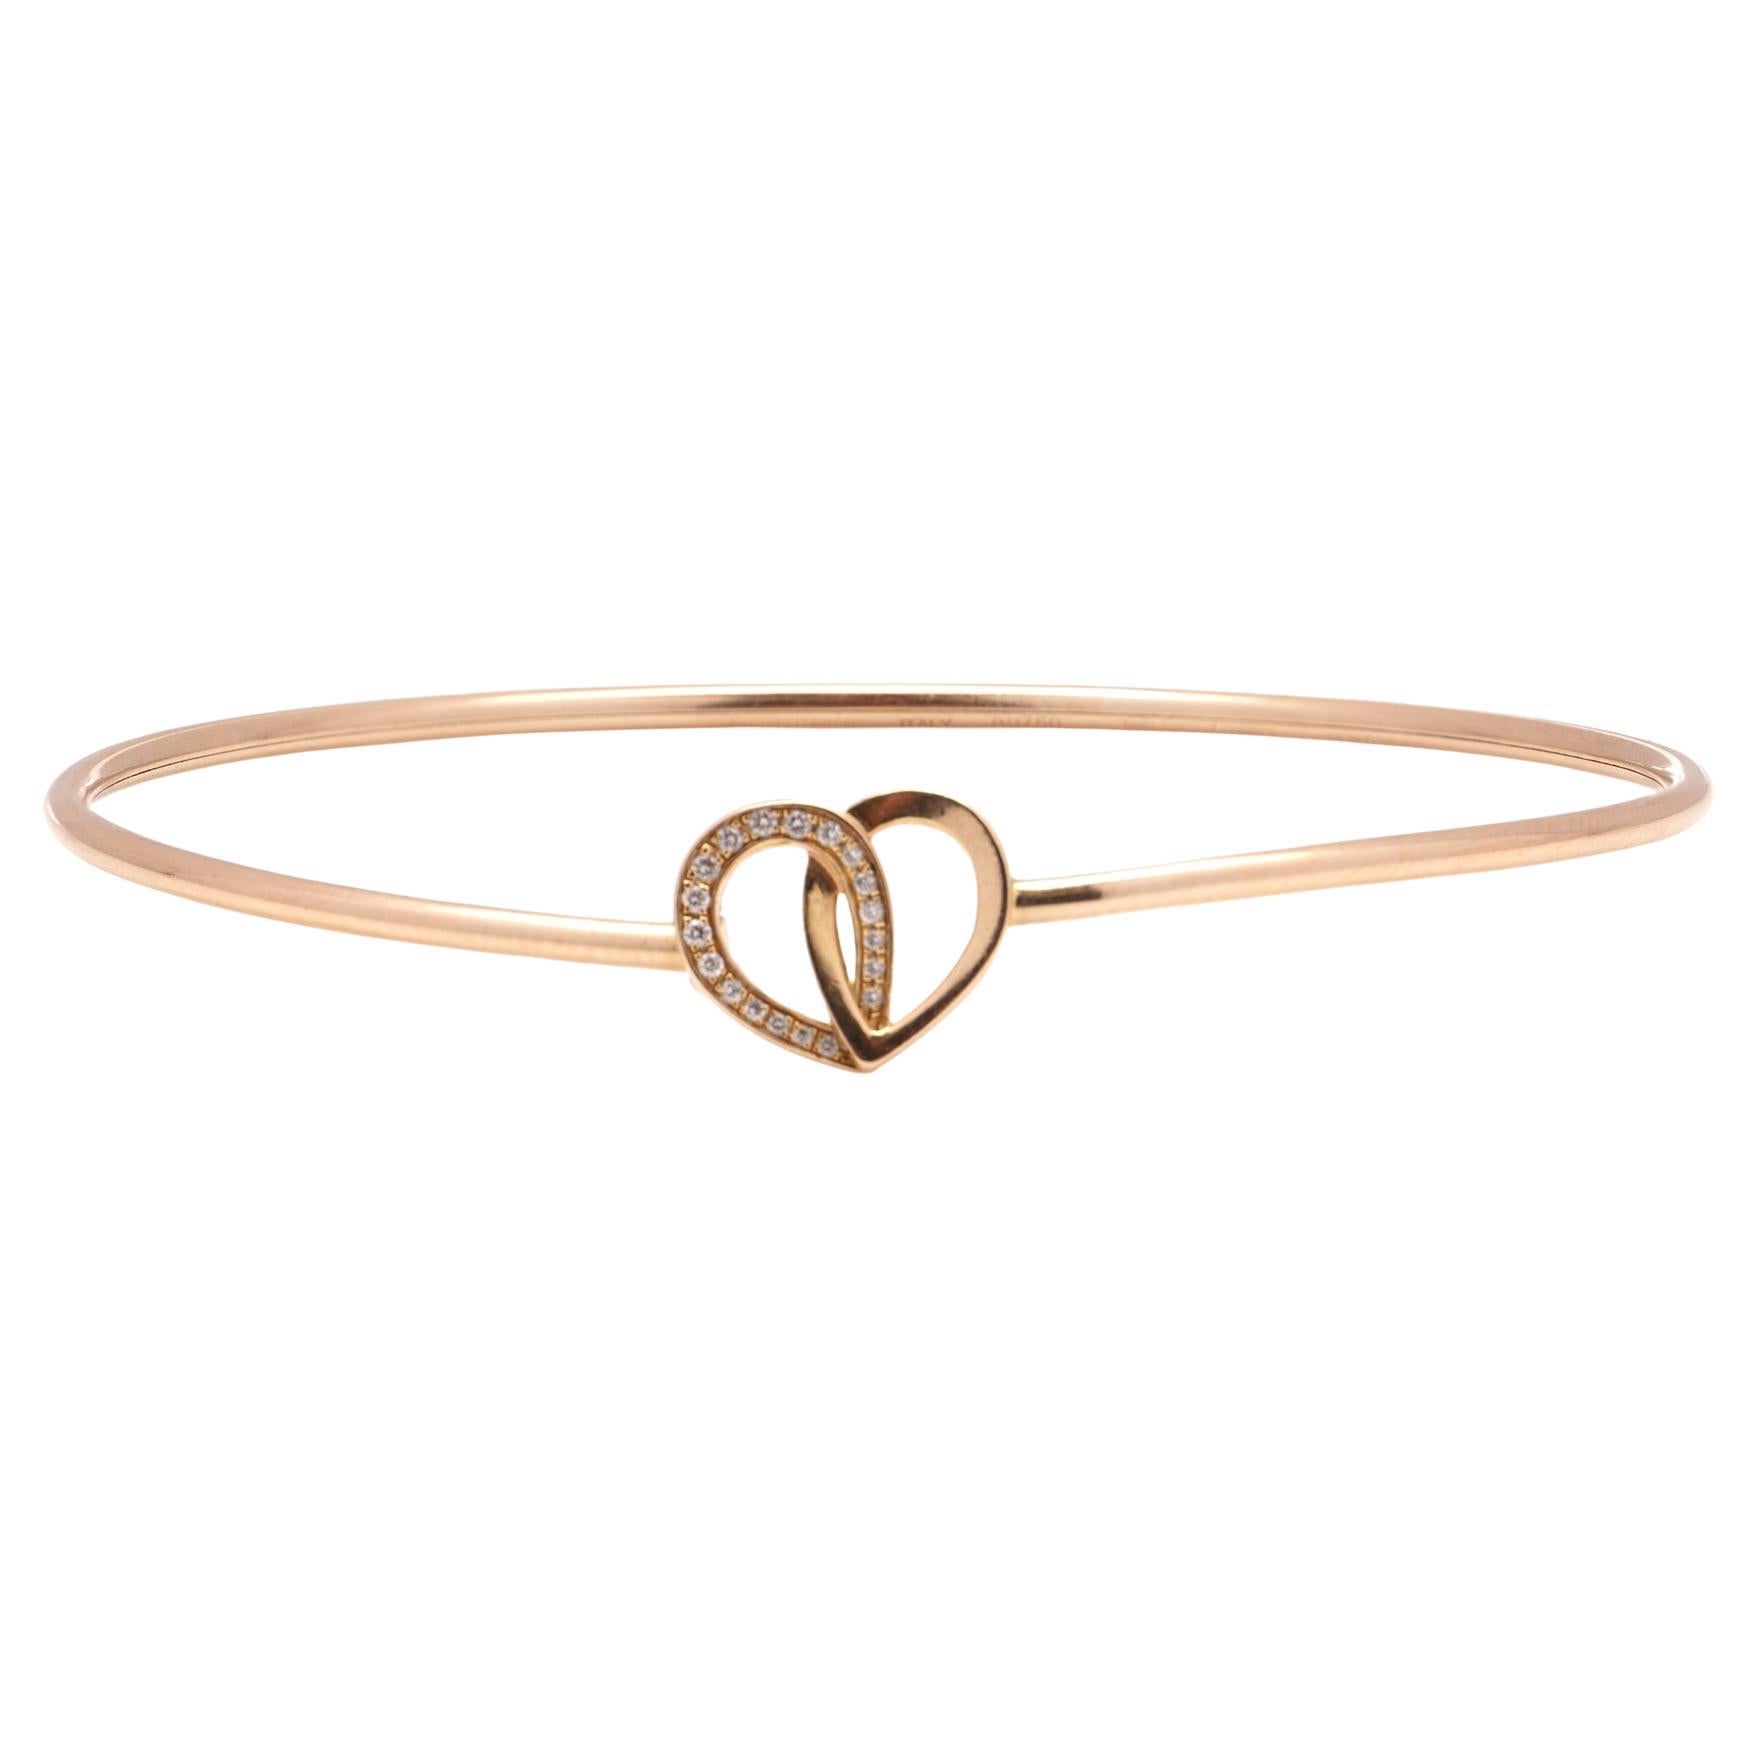 Montblanc 18kt gold Valentine's day collection heart-shaped bangle with diamonds